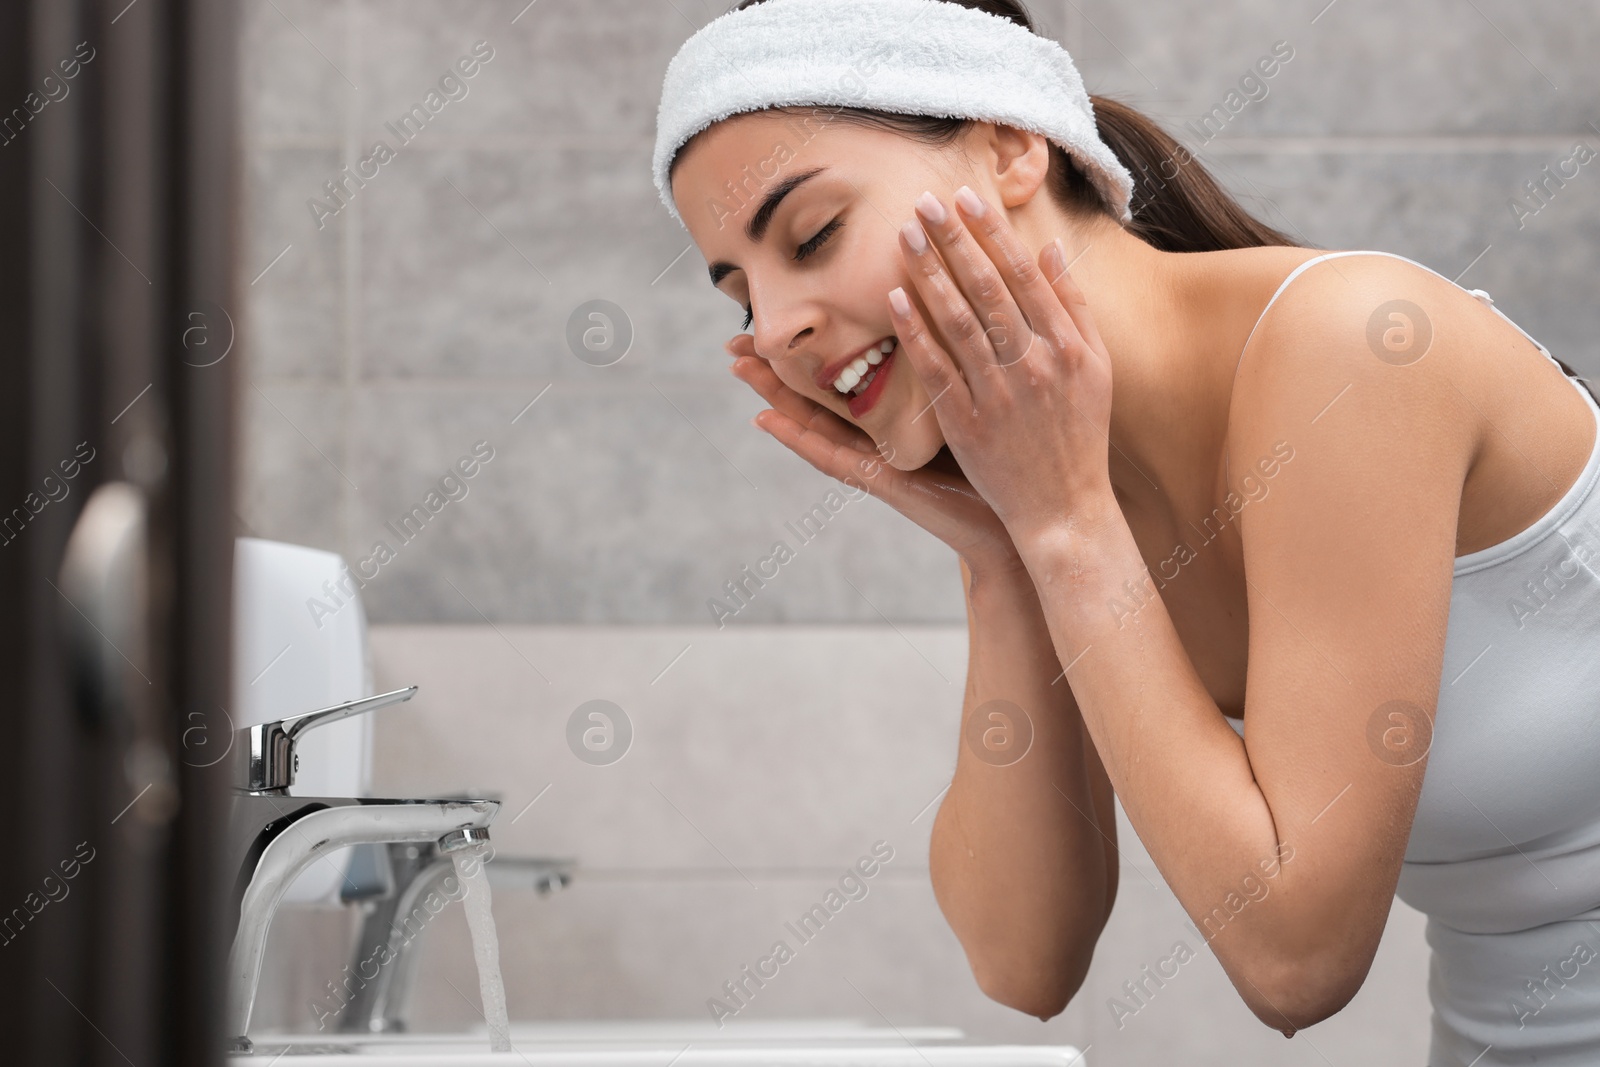 Photo of Young woman with headband washing her face in bathroom